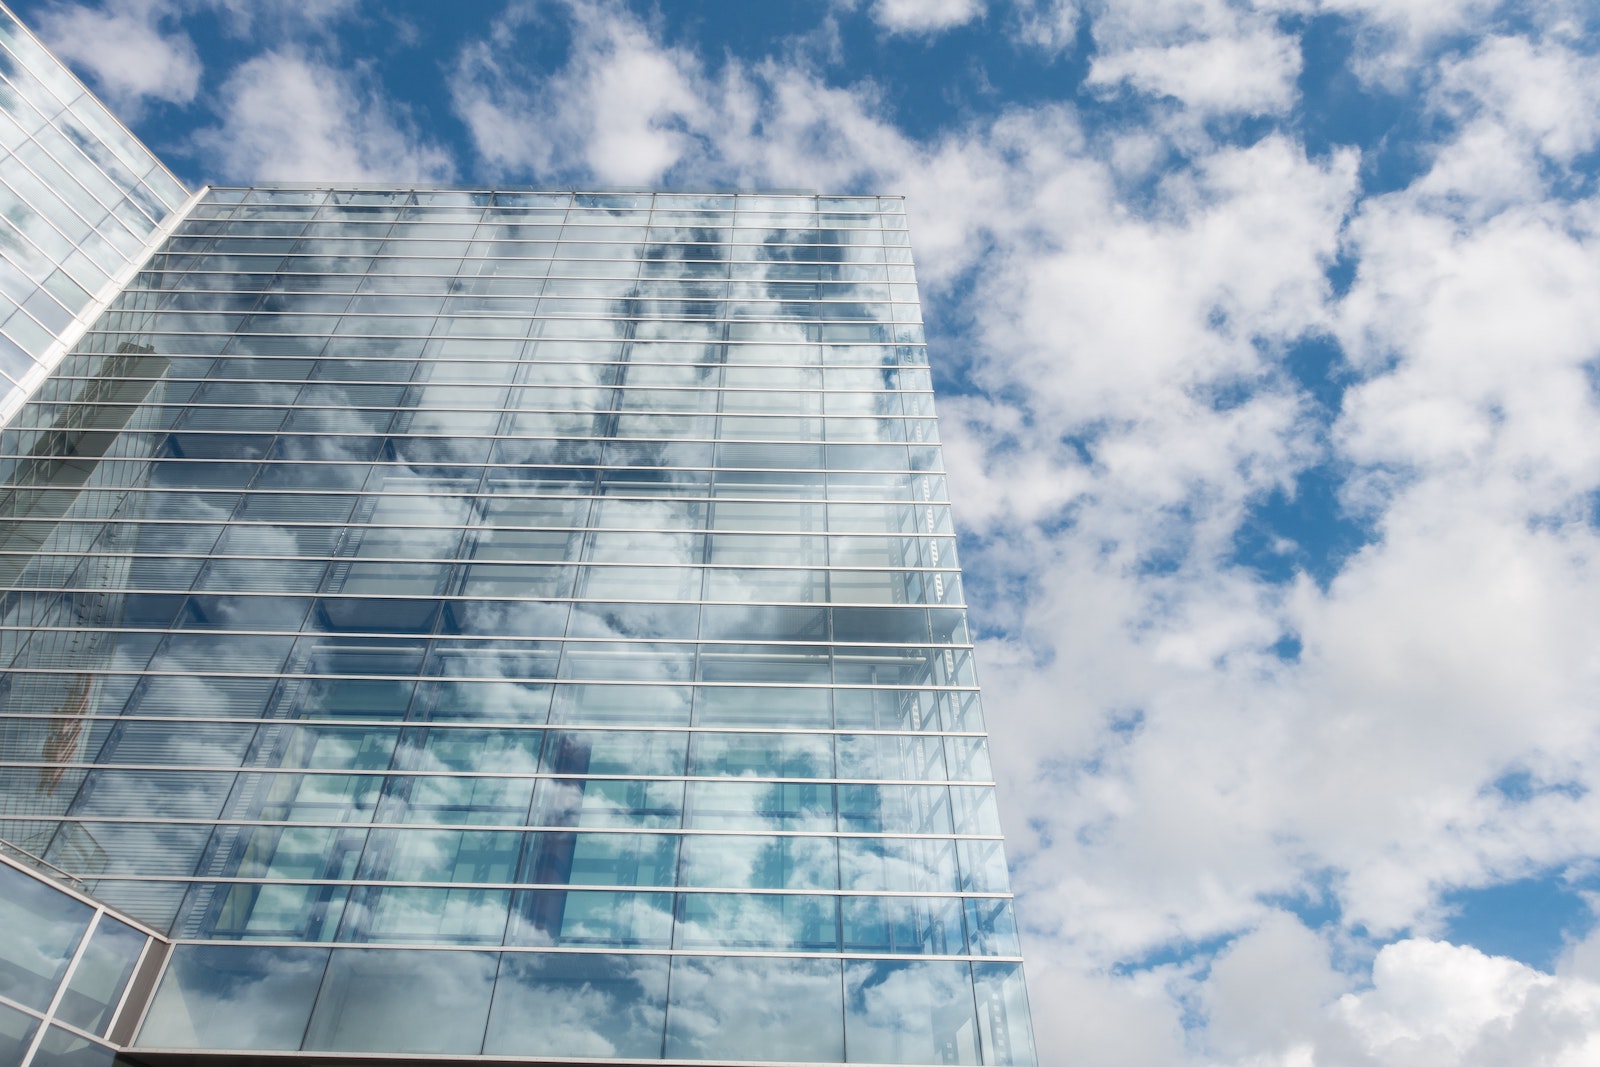 A tall glass building surrounded by clouds and in front of a blue sky that makes it look almost transparent